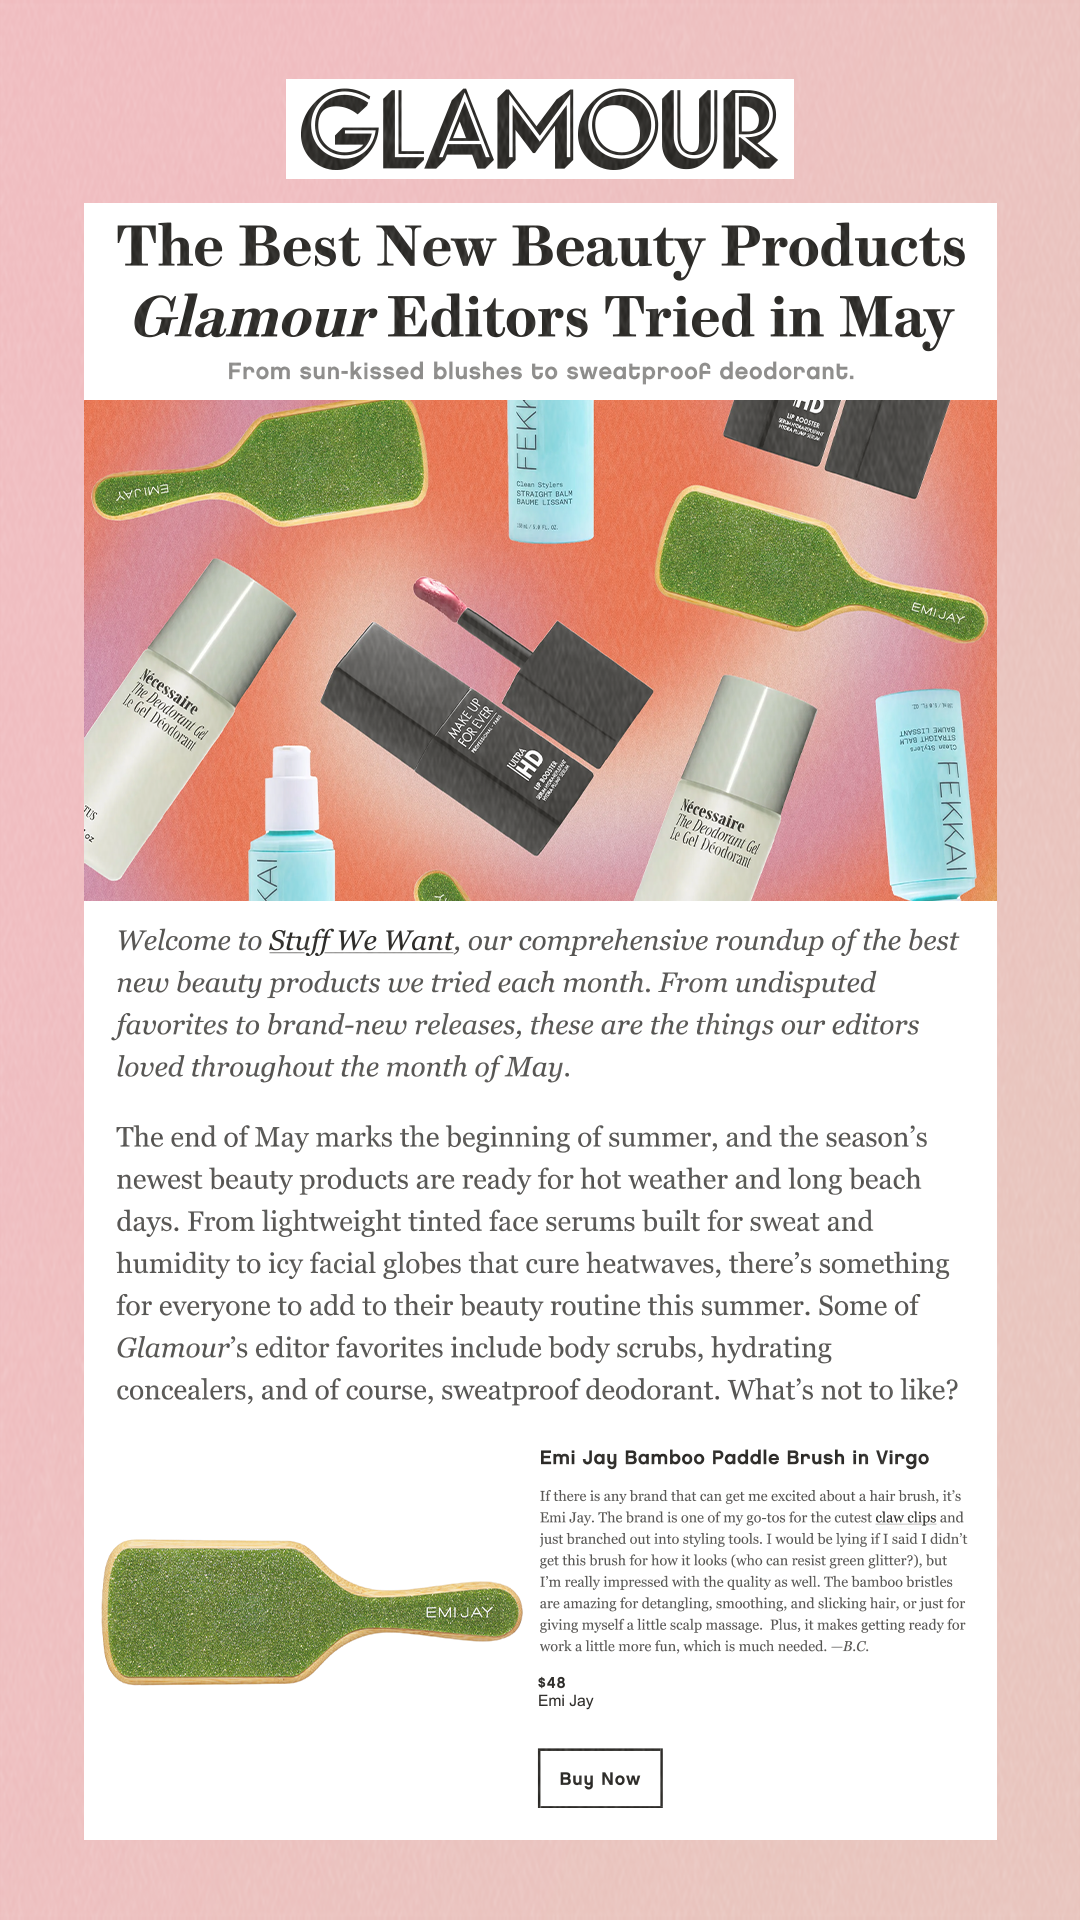 The Best New Beauty Products Glamour Editors Tried in May From sun-kissed blushes to sweatproof deodorant. Welcome to Stuff We Want, our comprehensive roundup of the best new beauty products we tried each month. From undisputed favorites to brand-new releases, these are the things our editors loved throughout the month of May. The end of May marks the beginning of summer, and the season’s newest beauty products are ready for hot weather and long beach days. From lightweight tinted face serums built for sweat and humidity to icy facial globes that cure heatwaves, there’s something for everyone to add to their beauty routine this summer. Some of Glamour’s editor favorites include body scrubs, hydrating concealers, and of course, sweatproof deodorant. What’s not to like? Emi Jay Bamboo Paddle Brush in Virgo If there is any brand that can get me excited about a hair brush, it’s Emi Jay. The brand is one of my go-tos for the cutest claw clips and just branched out into styling tools. I would be lying if I said I didn’t get this brush for how it looks (who can resist green glitter?), but I’m really impressed with the quality as well. The bamboo bristles are amazing for detangling, smoothing, and slicking hair, or just for giving myself a little scalp massage.  Plus, it makes getting ready for work a little more fun, which is much needed. —B.C. $48 Emi Jay Buy Now